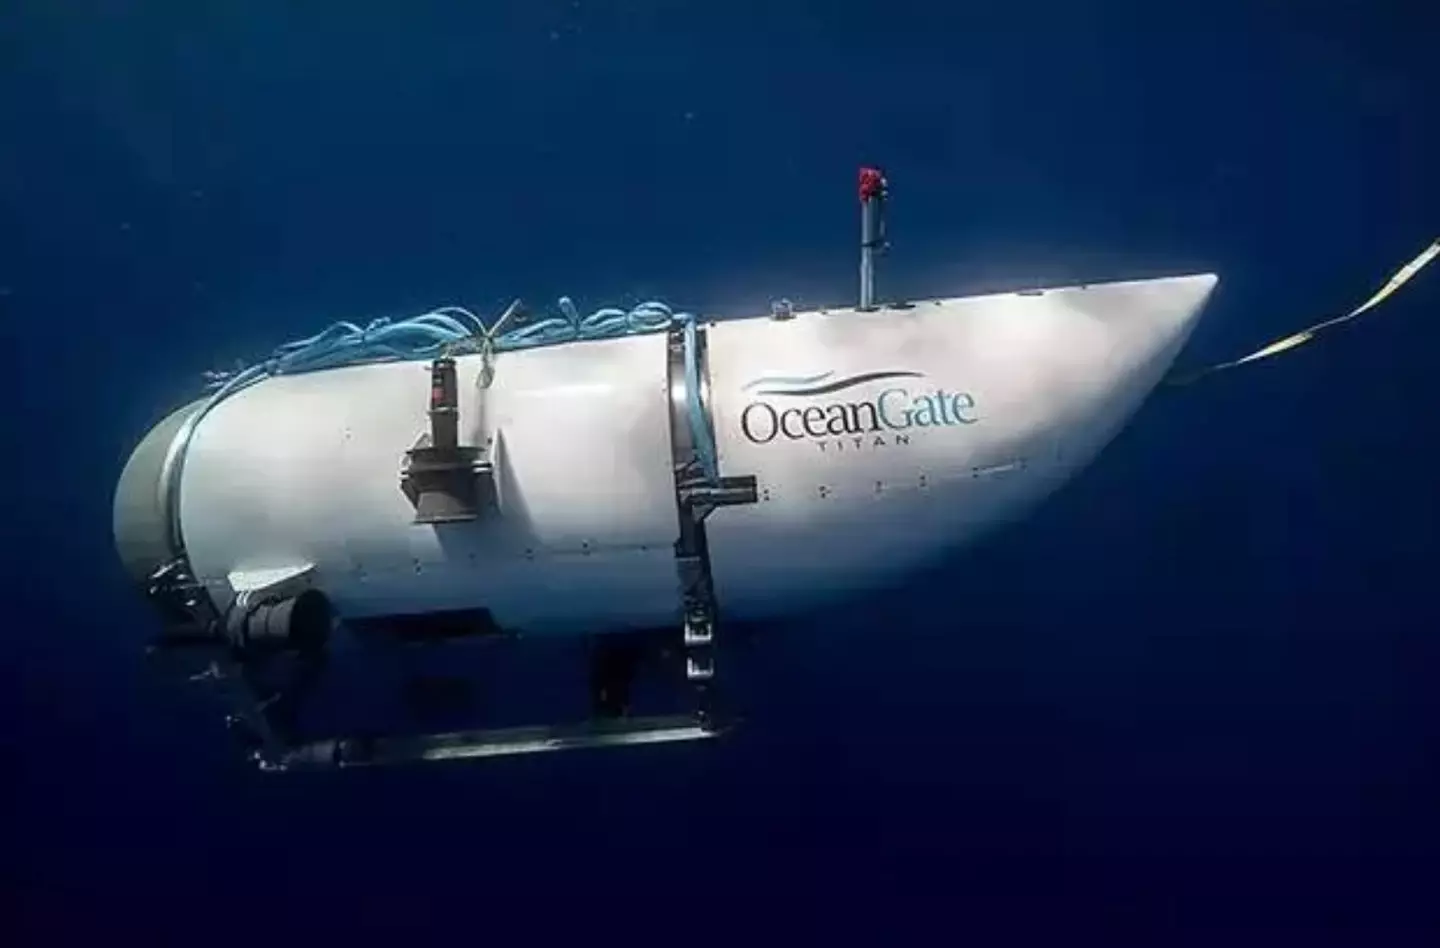 The OceanGate submersible.